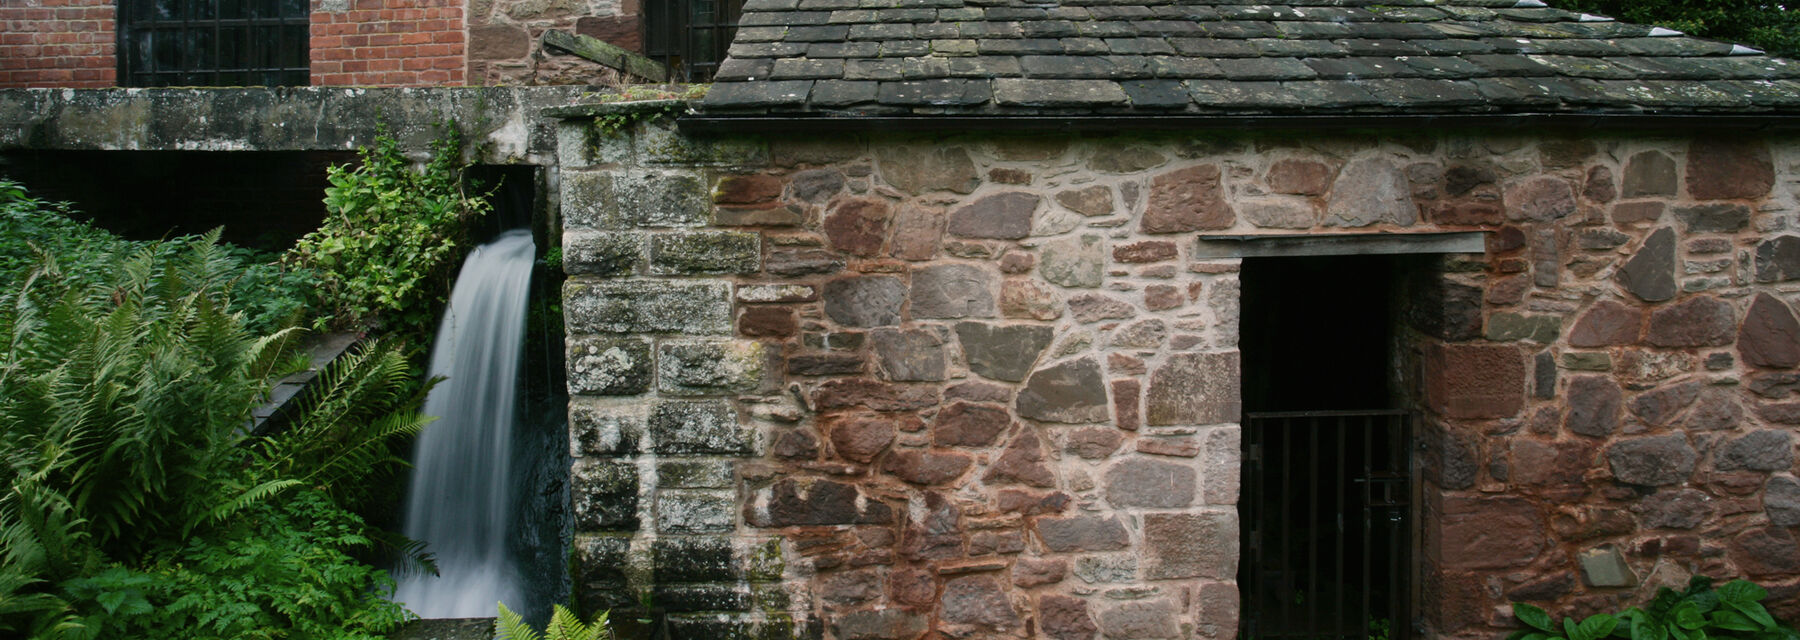 The exterior of the stone Barry Mill with the millrace outflow pouring out at the side.